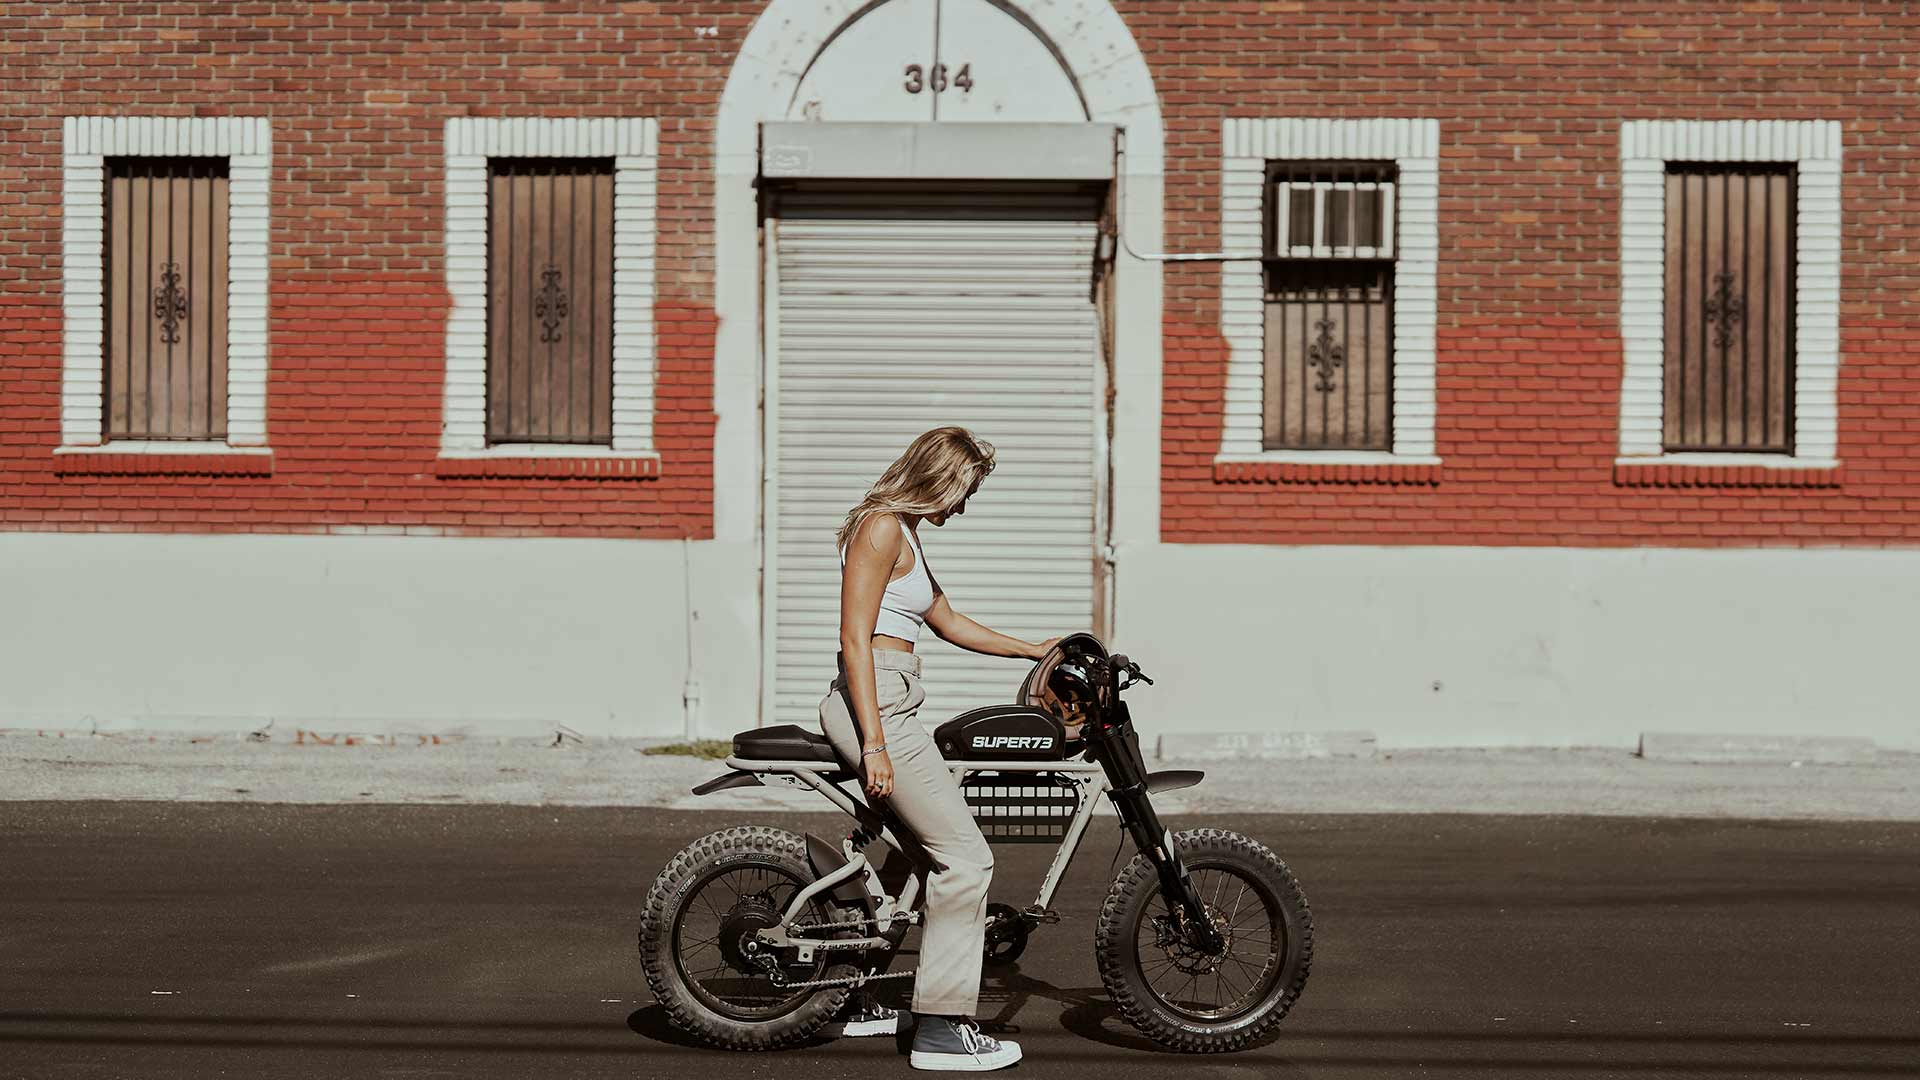 Rider posing with Super73 RX ebike in front of stylish brick building